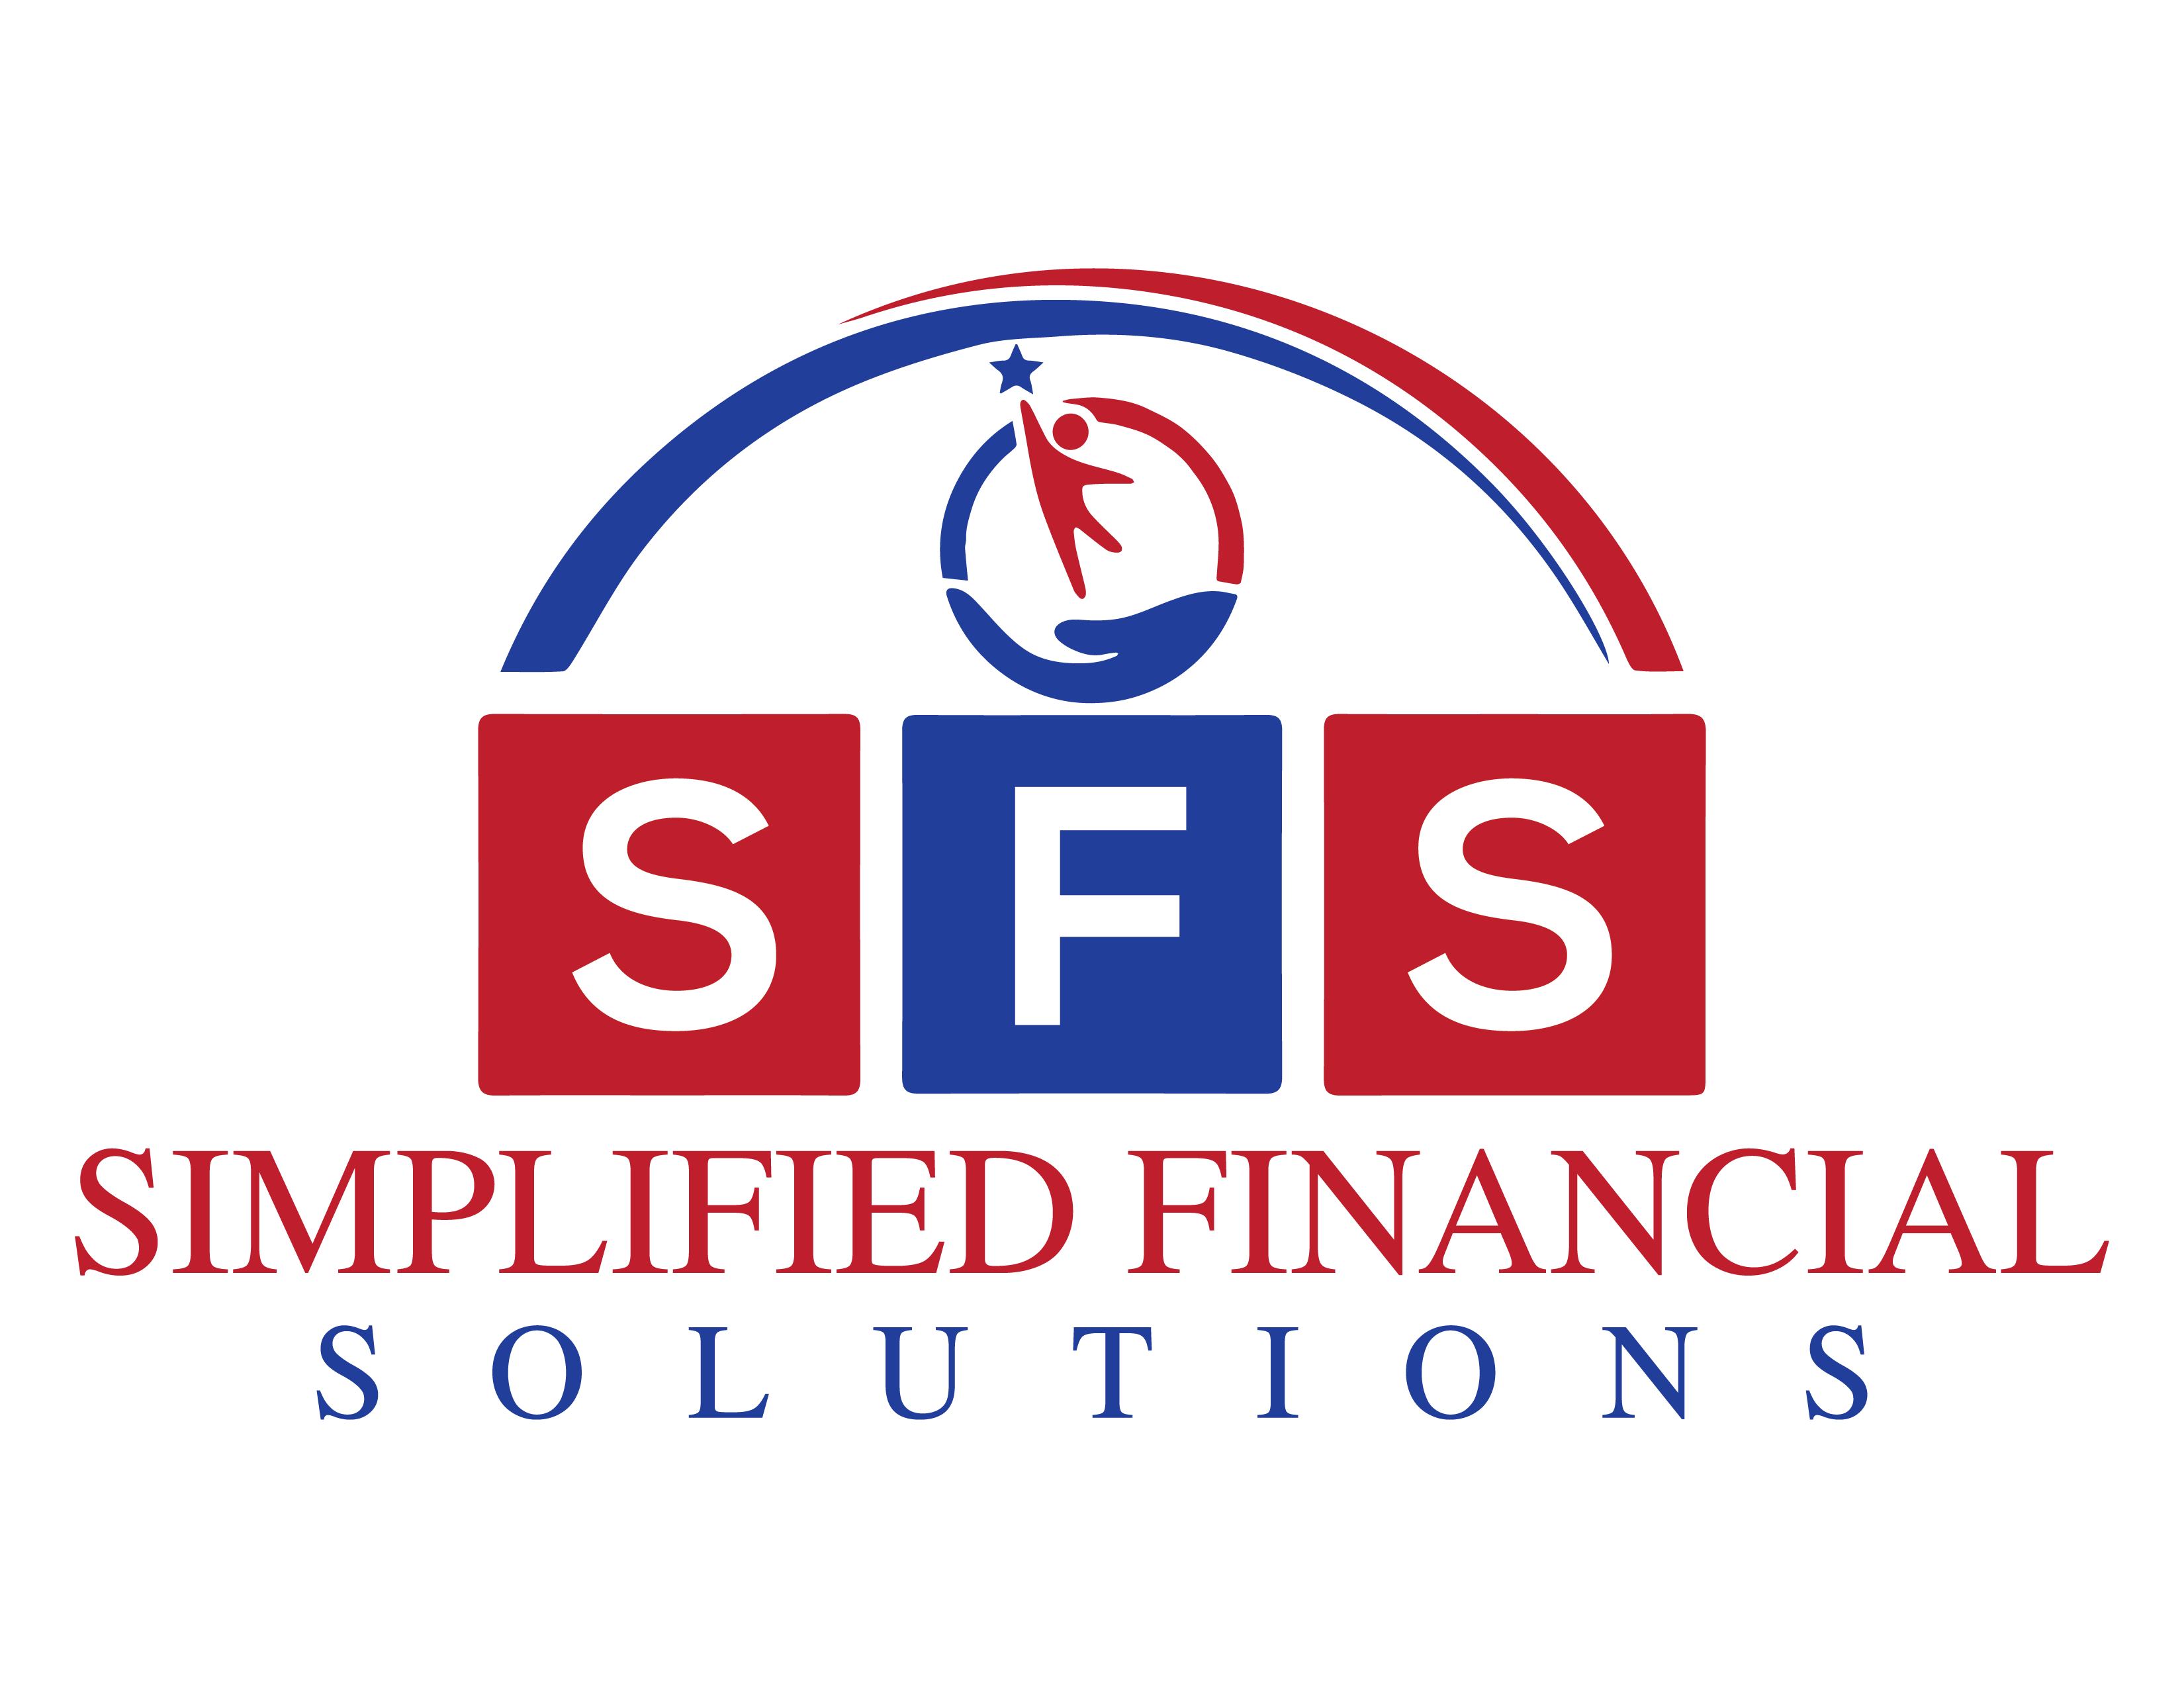 Simplified Financial Solutions